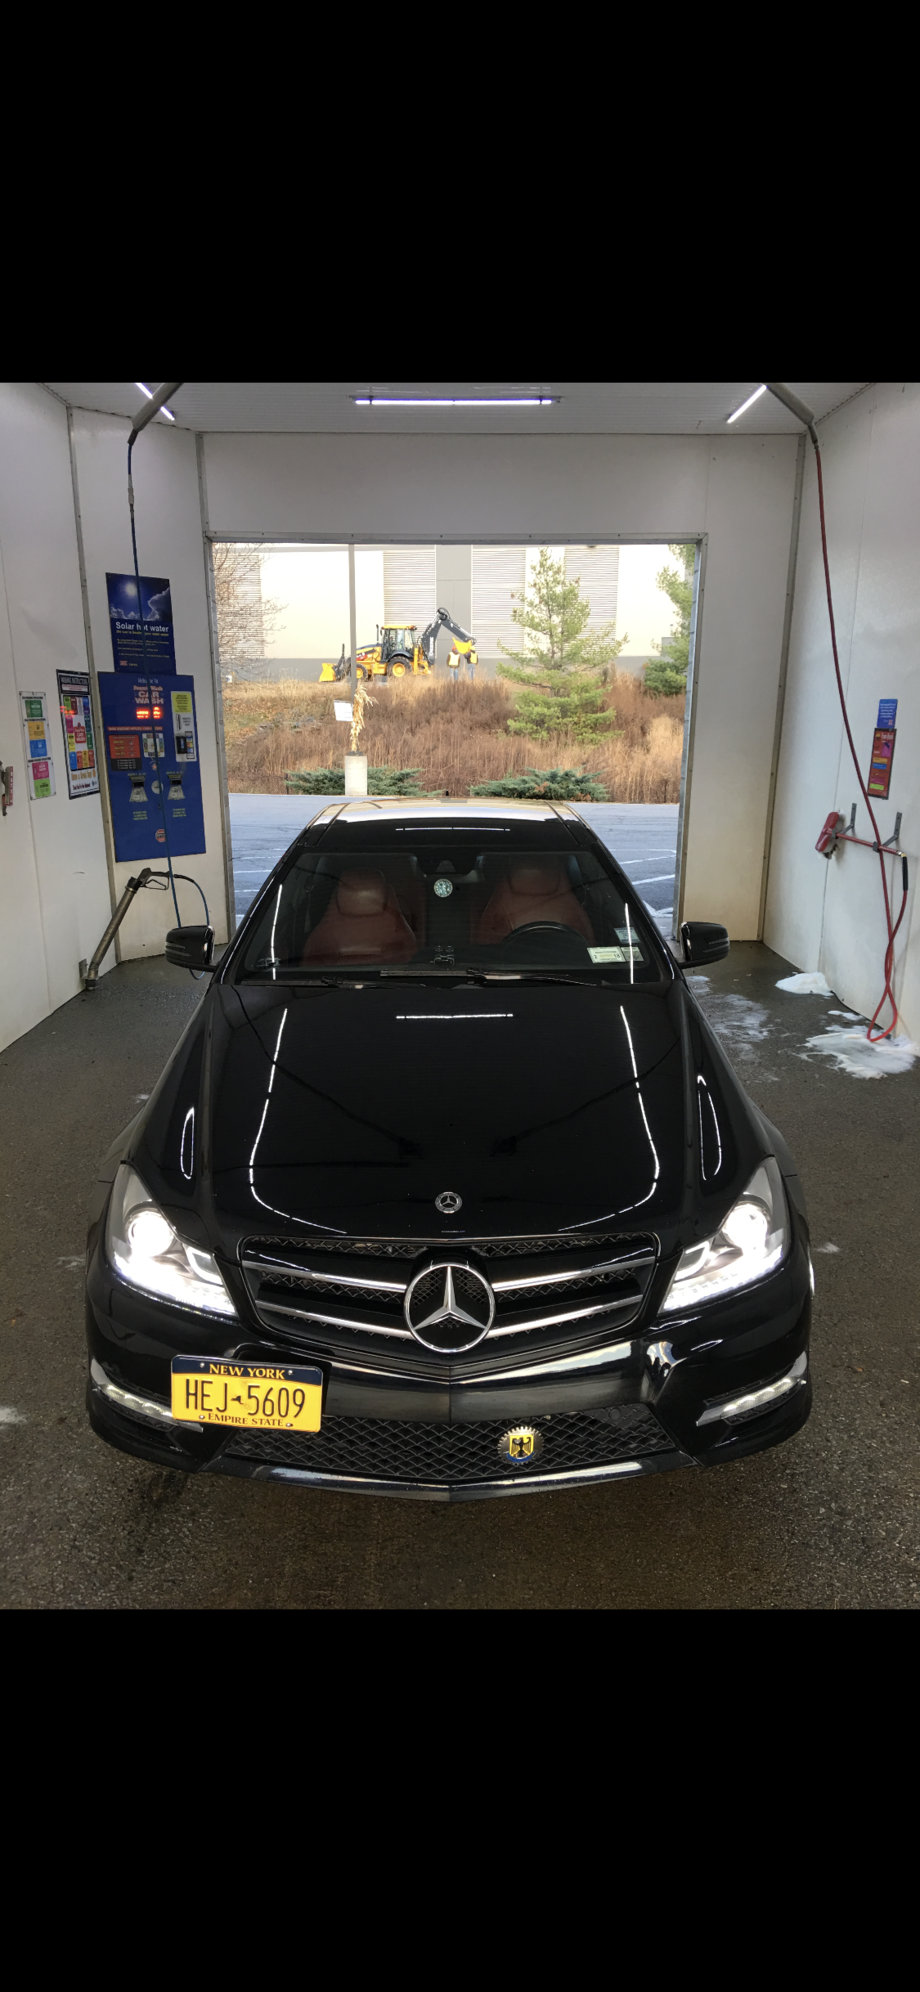 Lights - Spyder Projector w/ 4300k kit (negotiable) - Used - 2012 to 2015 Mercedes-Benz C300 - Hopewell Junction, NY 12533, United States